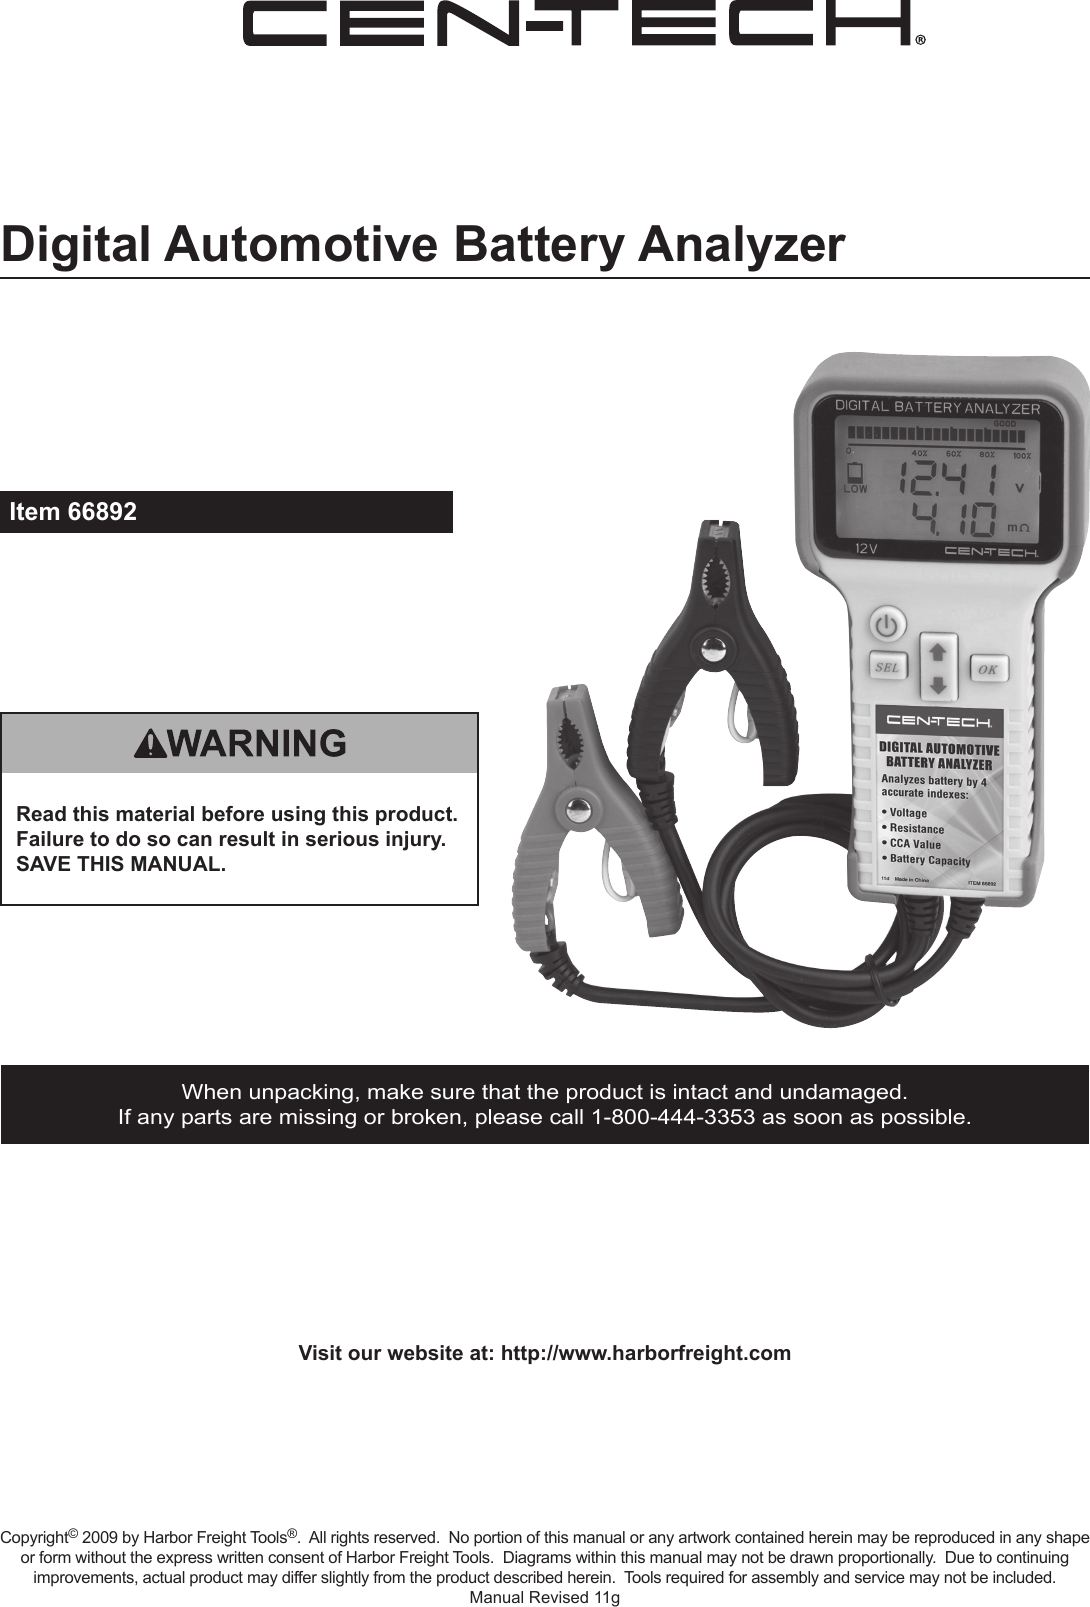 Page 1 of 8 - Harbor-Freight Harbor-Freight-Digital-Battery-Analyzer-Product-Manual-  Harbor-freight-digital-battery-analyzer-product-manual